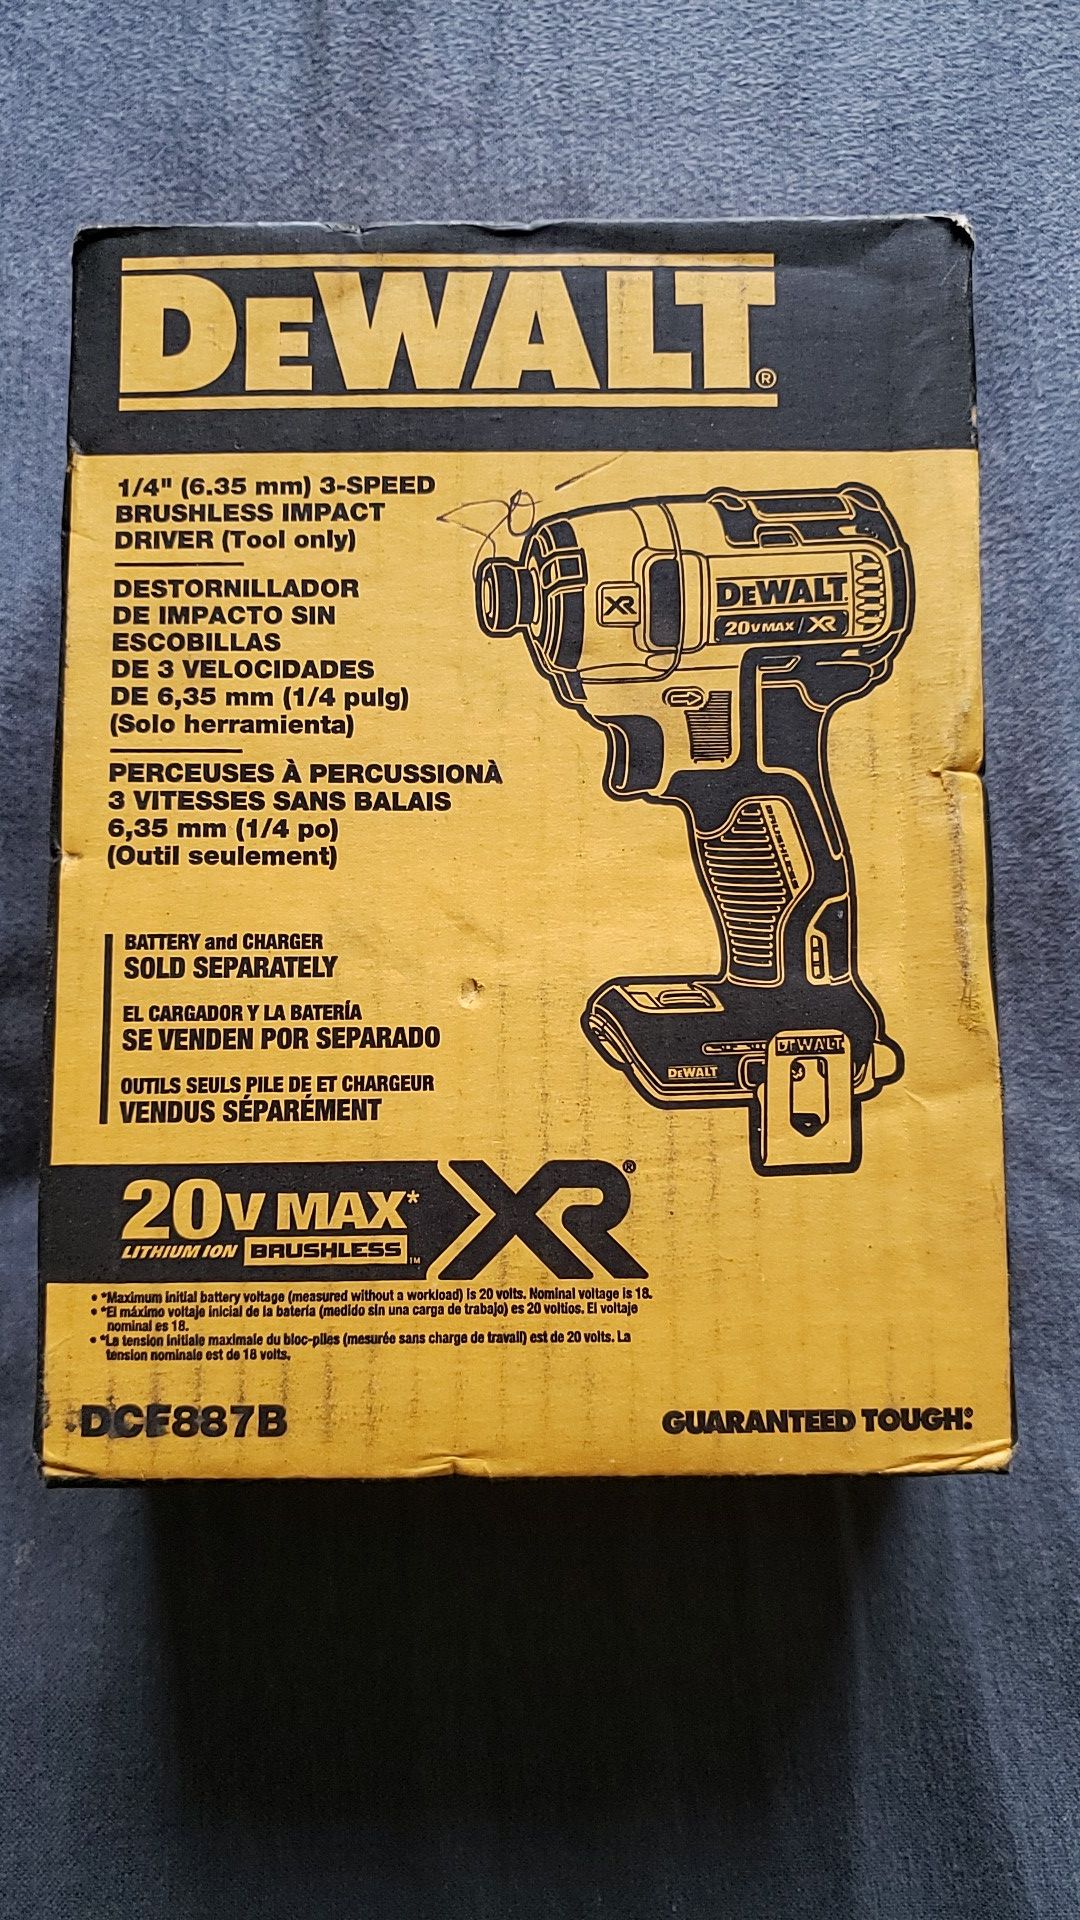 Dewalt 20v brushless xr 3speed impact brand new unopened bare tool no battery no charger $75 FIRM no OFFERS no MENOS